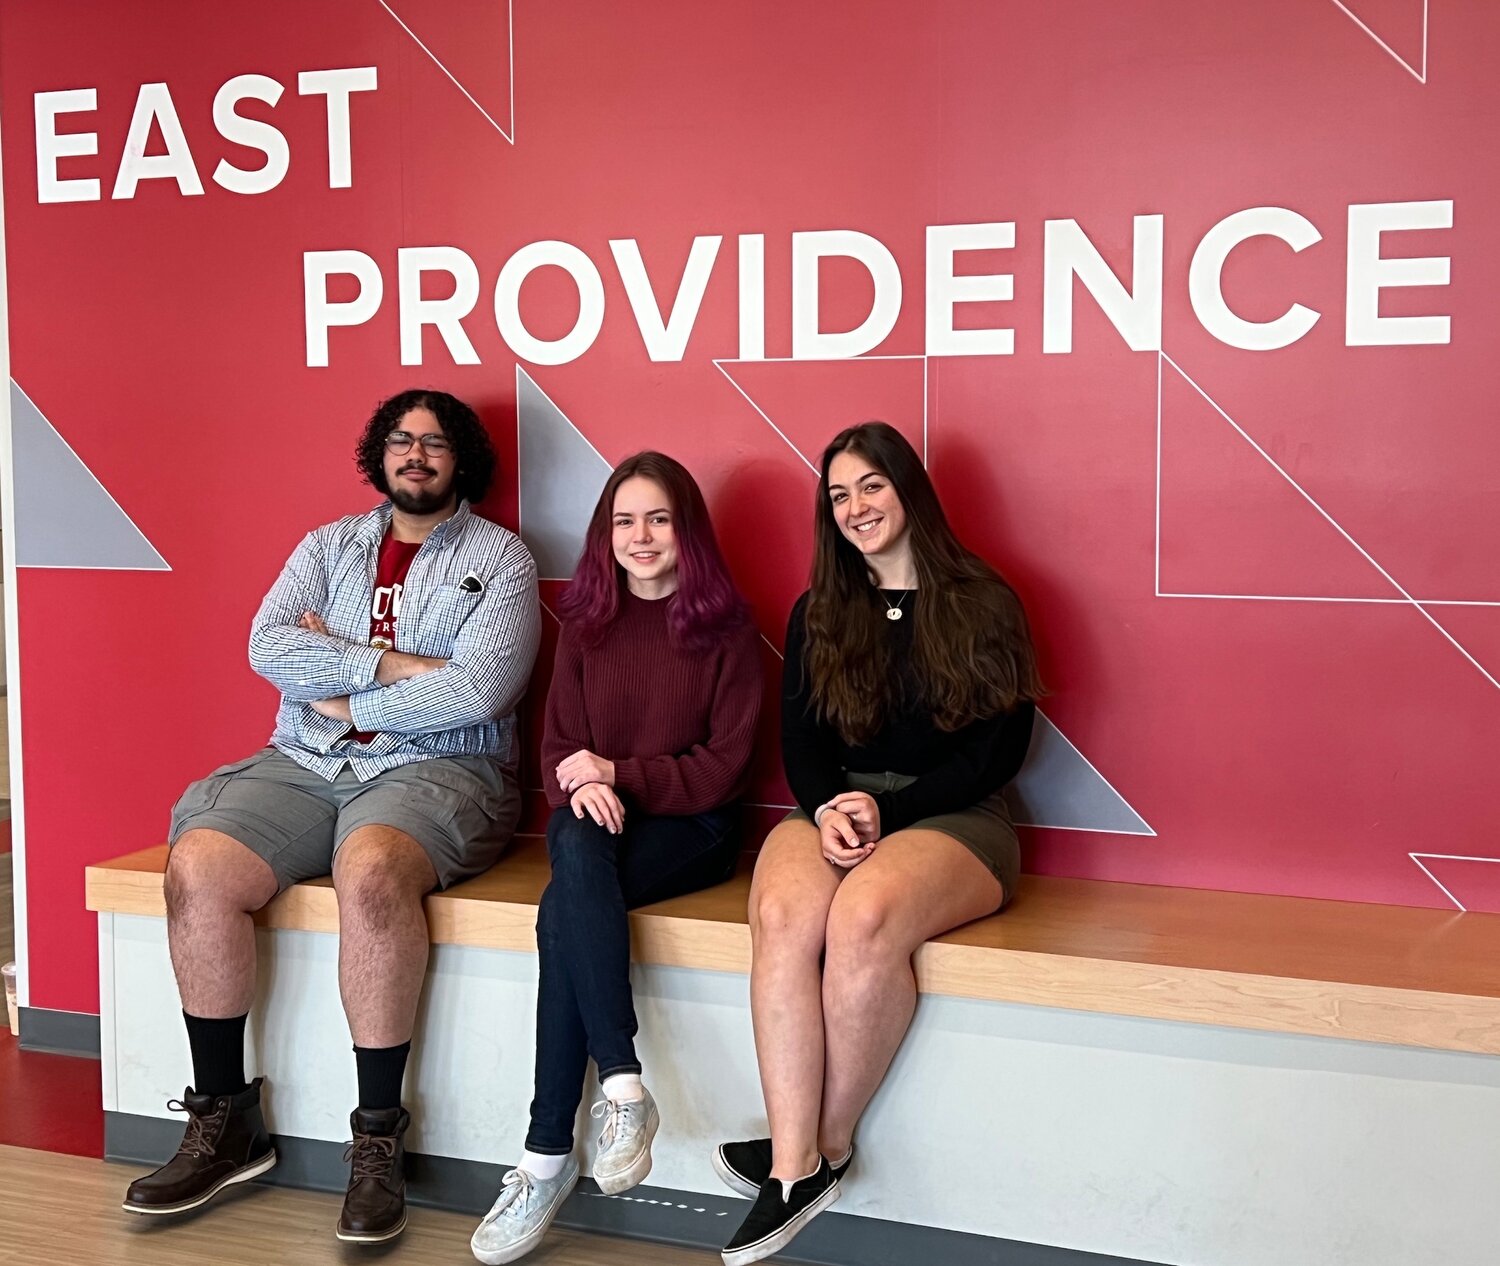 The top three students academically in the East Providence High School Class of 2023 — (from left to right) salutatorian Benjamin Fortin, valedictorian Gayatri Buchta and Camryn Correira, the uniquely East Providence avedatorian — will lead their mates through commencement exercises Friday, June 2, at Pierce Memorial Stadium. The ceremony begins at 6:30 p.m.